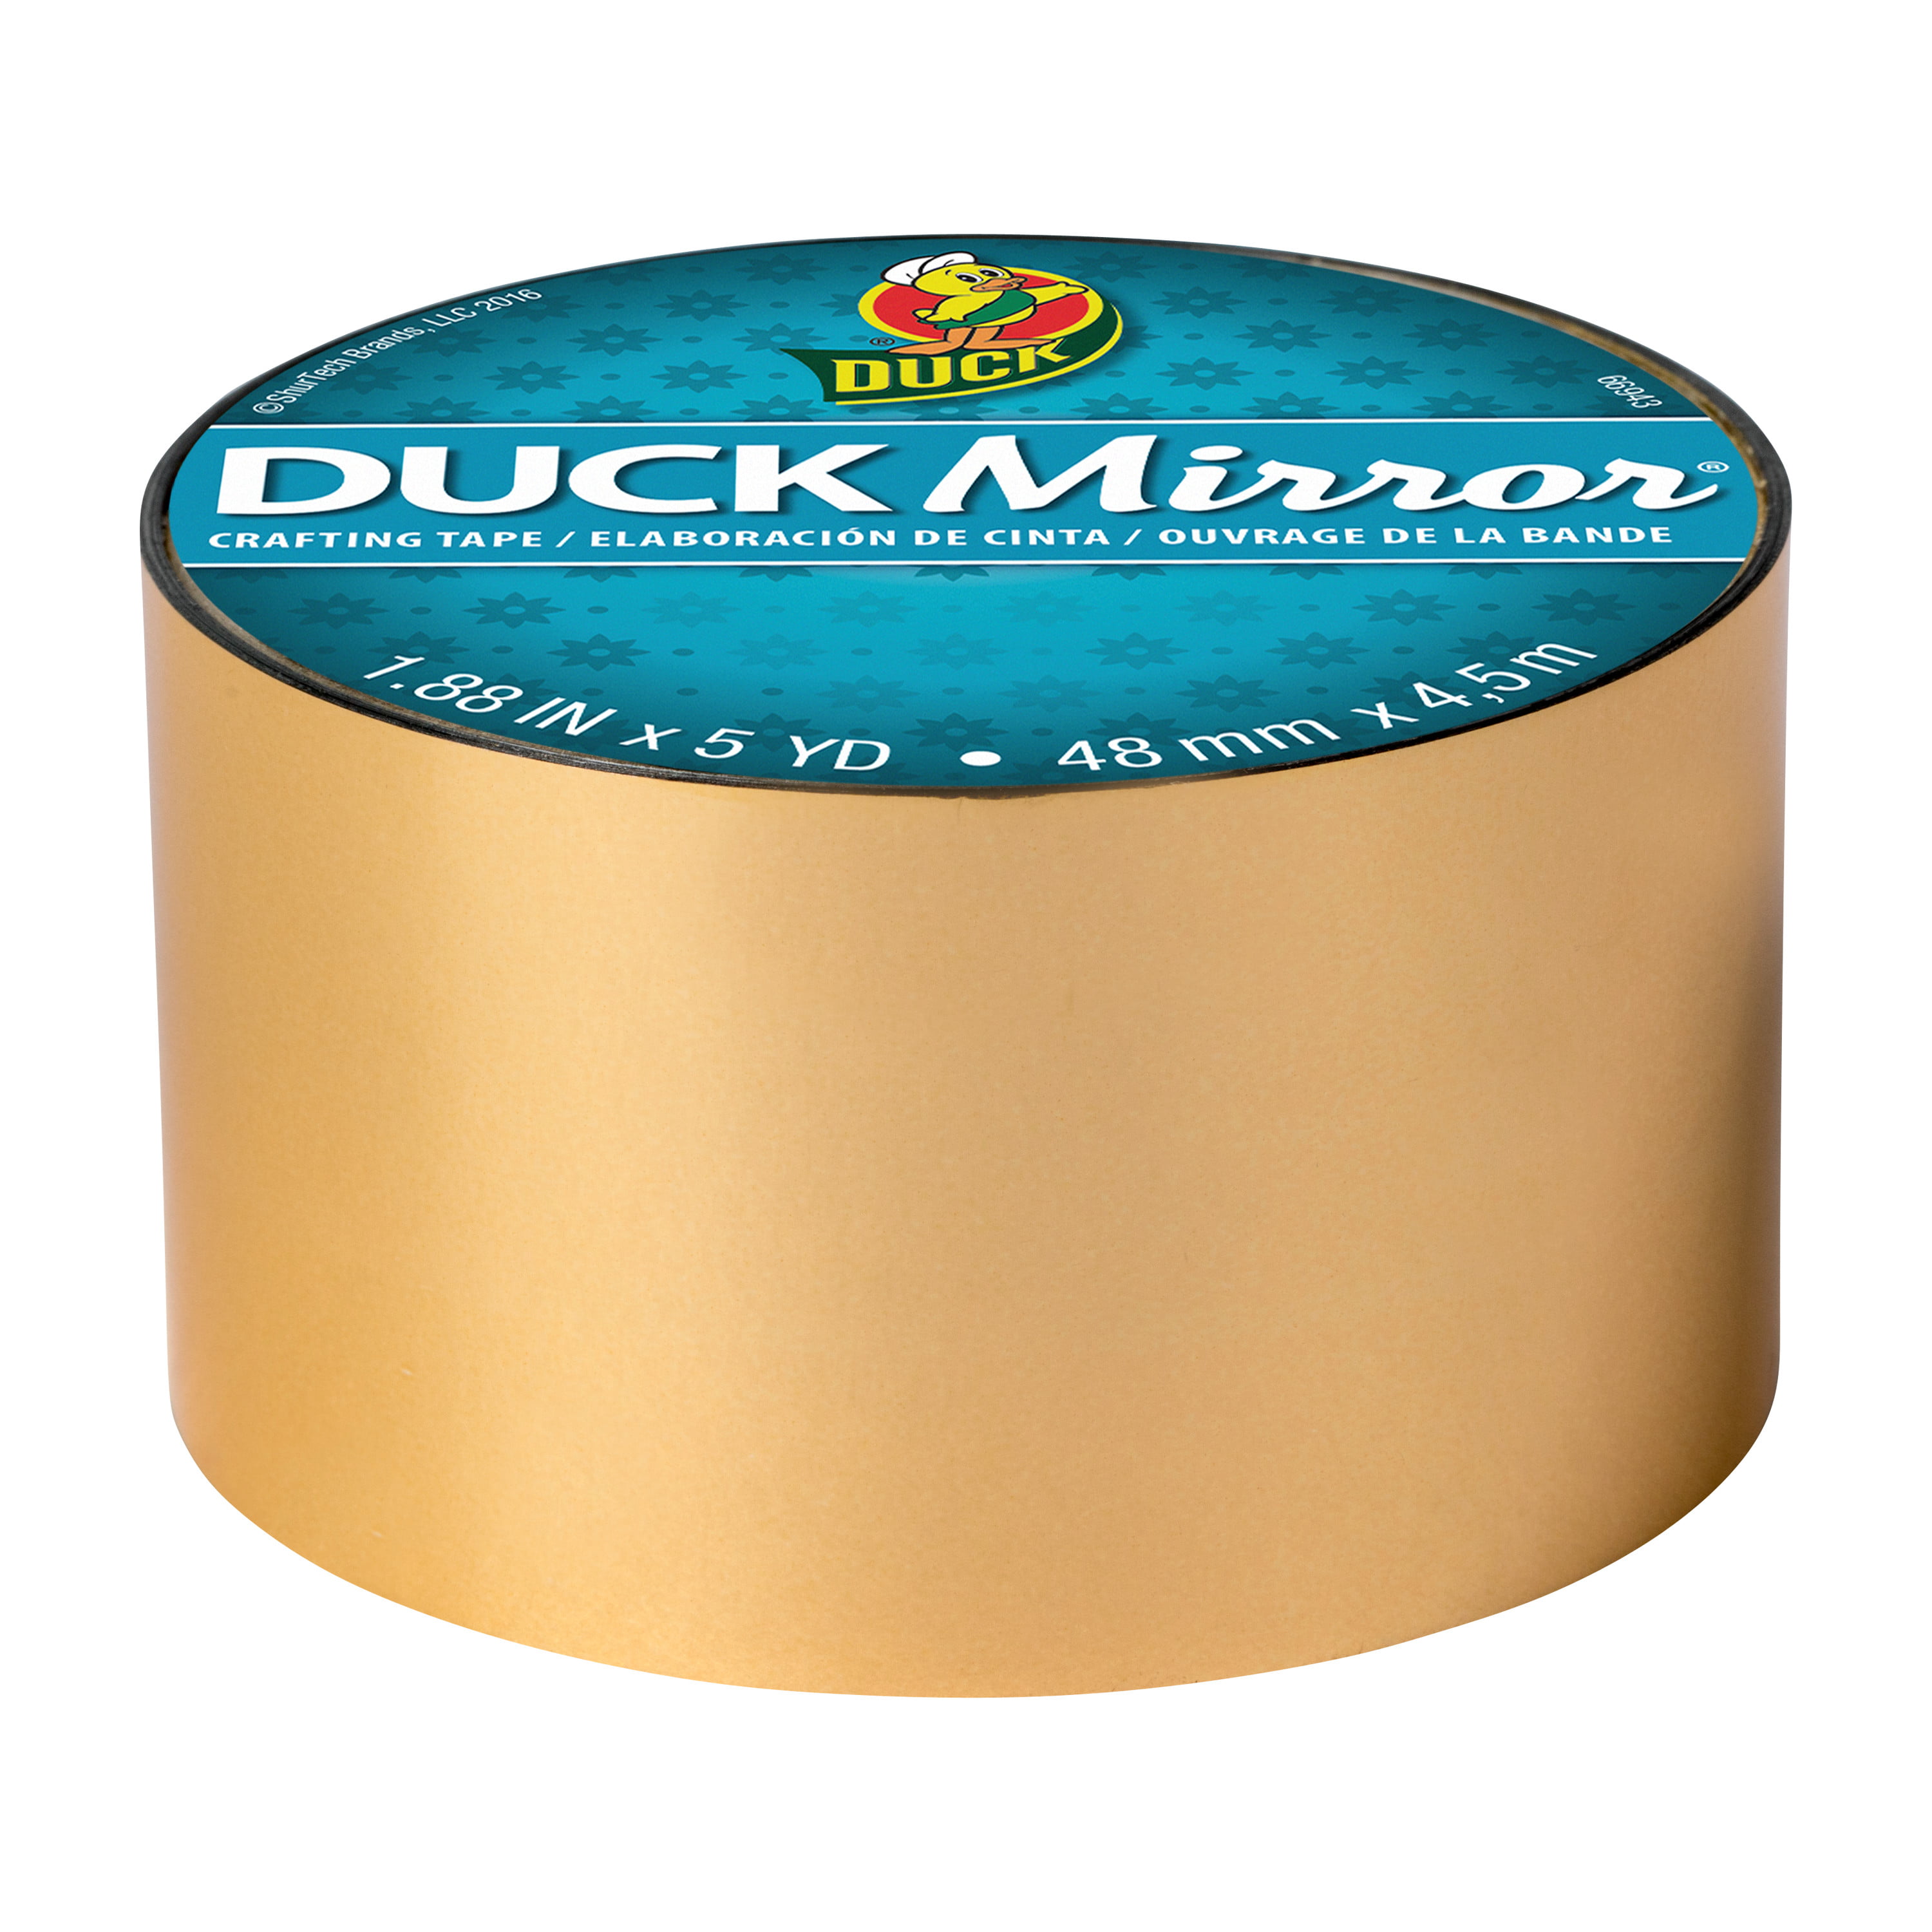 Duck® Duck Mirror® Crafting Tape - Gold, 5 yd - Fred Meyer